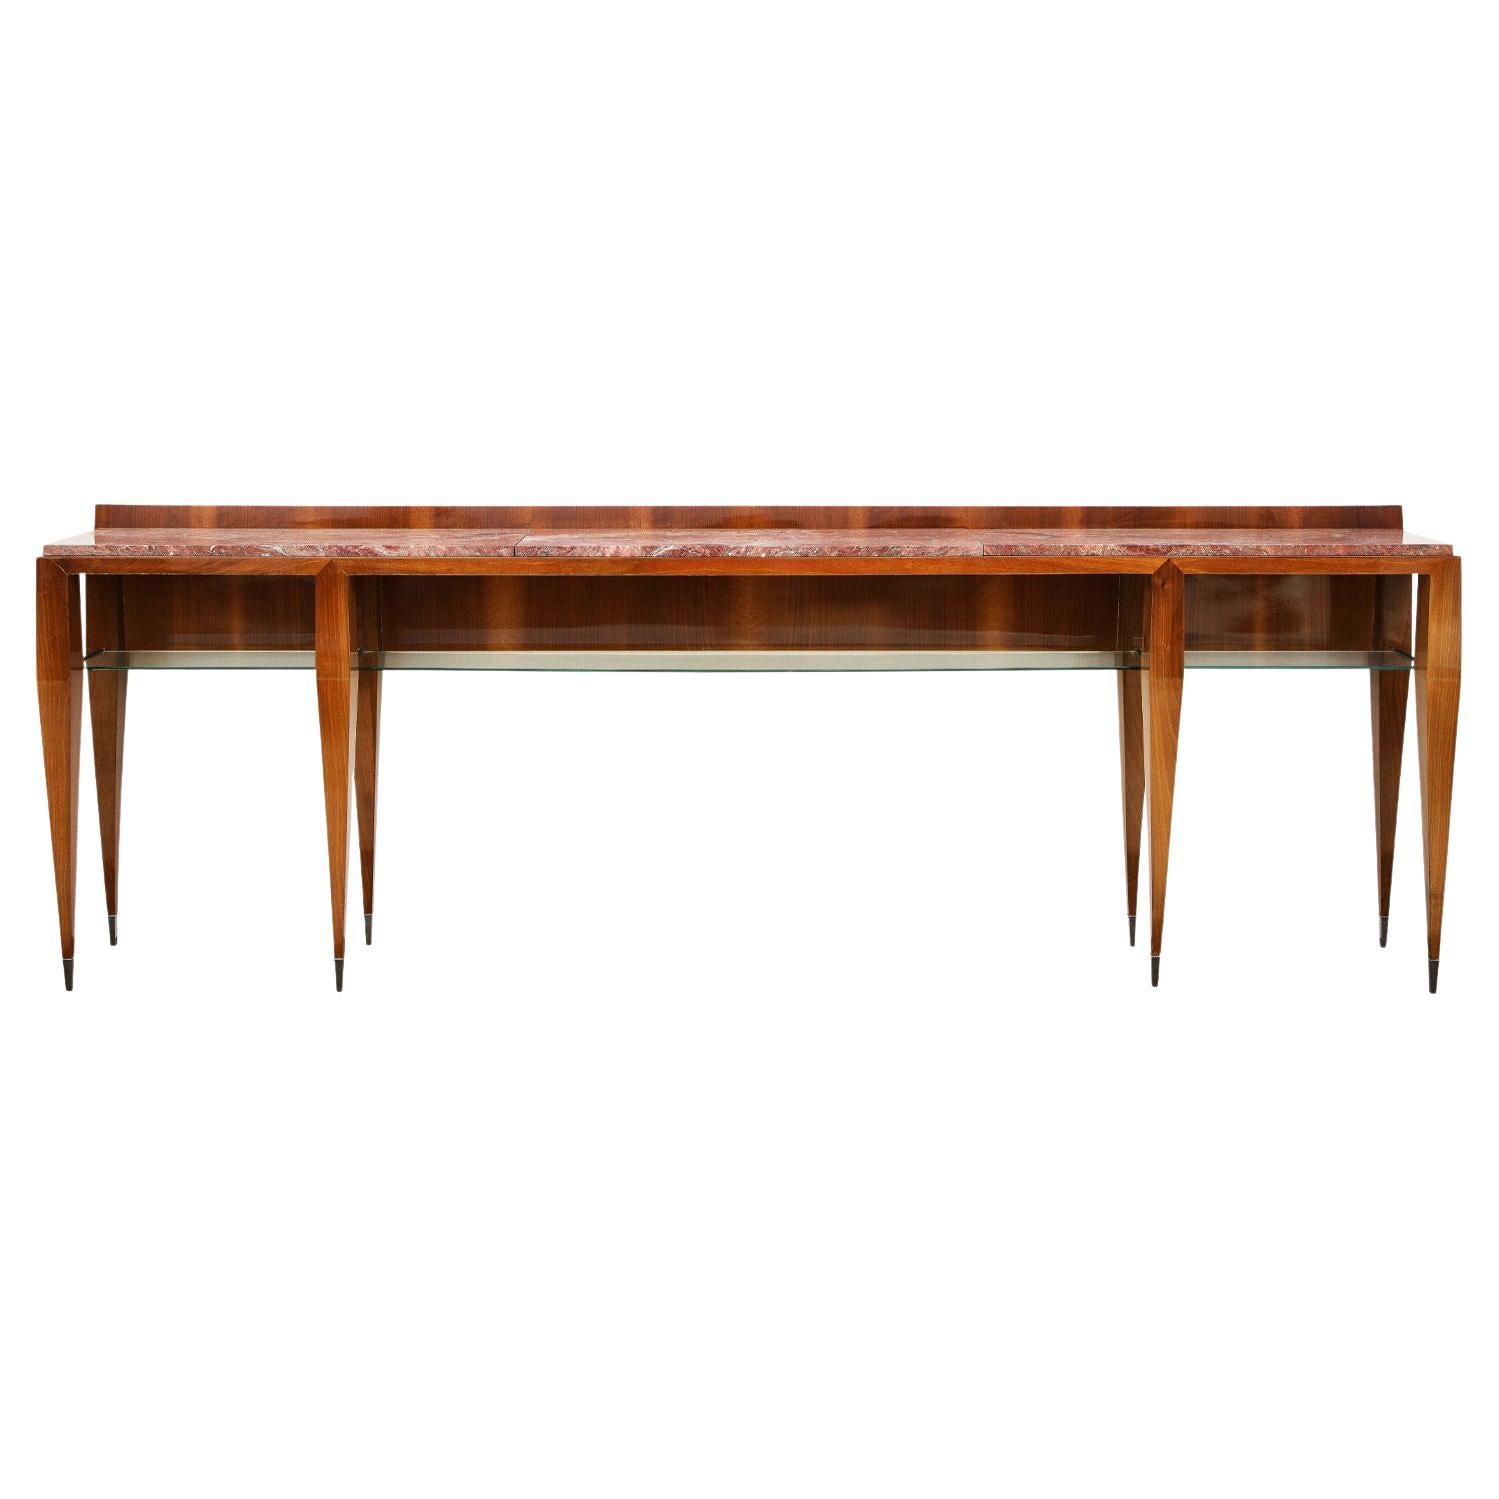 Gio Ponti Grand Console Table in Cherry with Red Marble Top ca 1958 For Sale